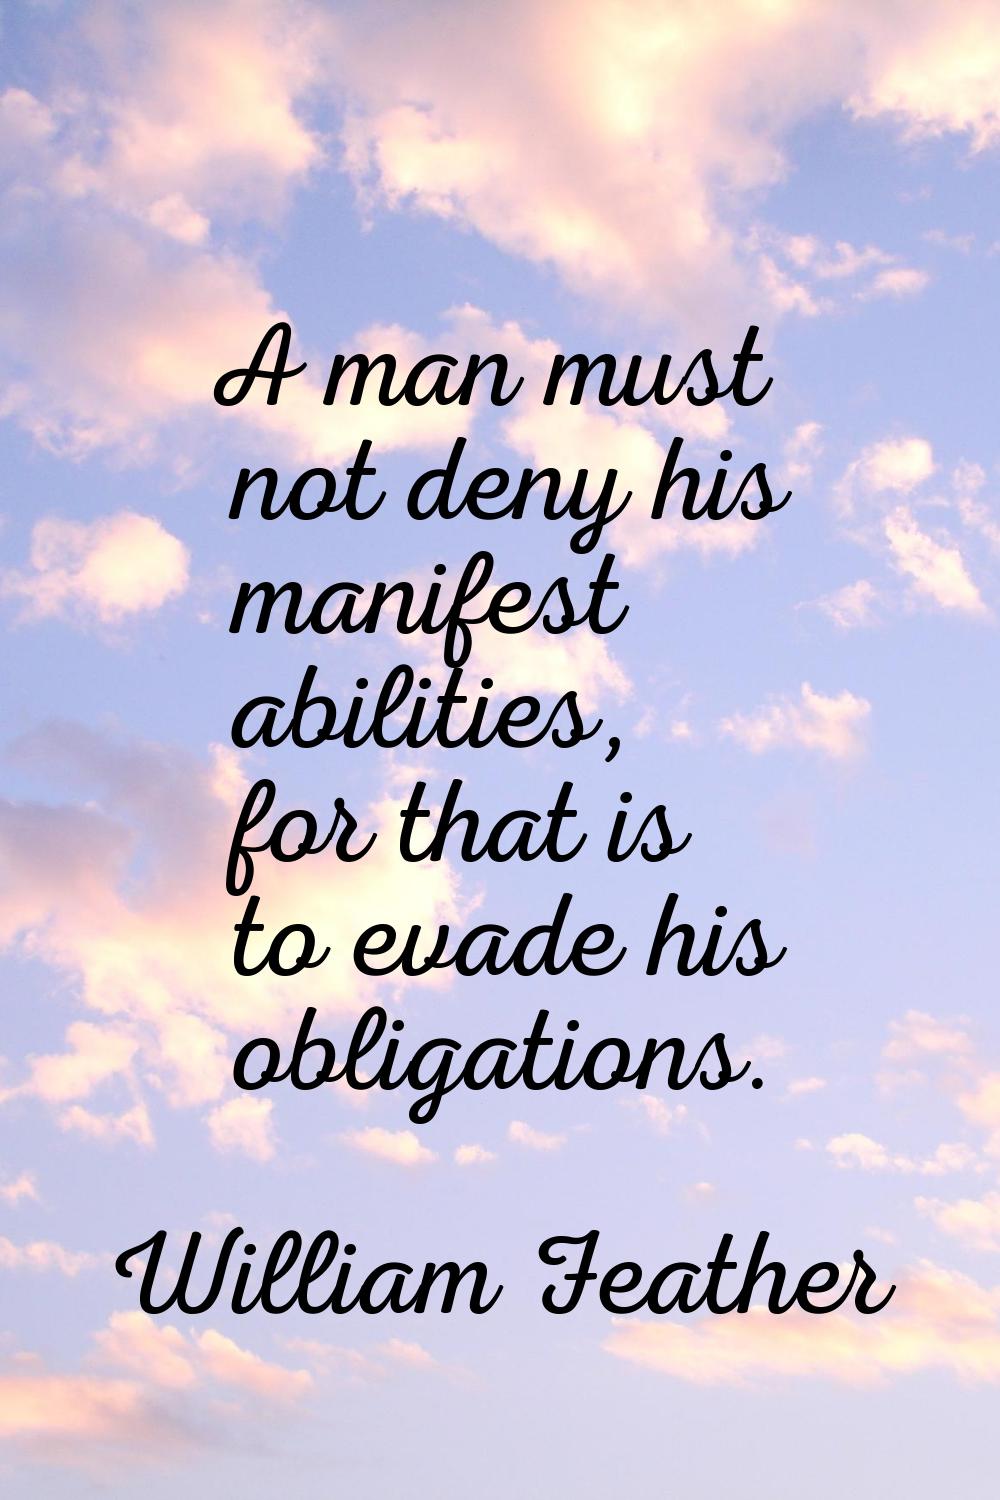 A man must not deny his manifest abilities, for that is to evade his obligations.